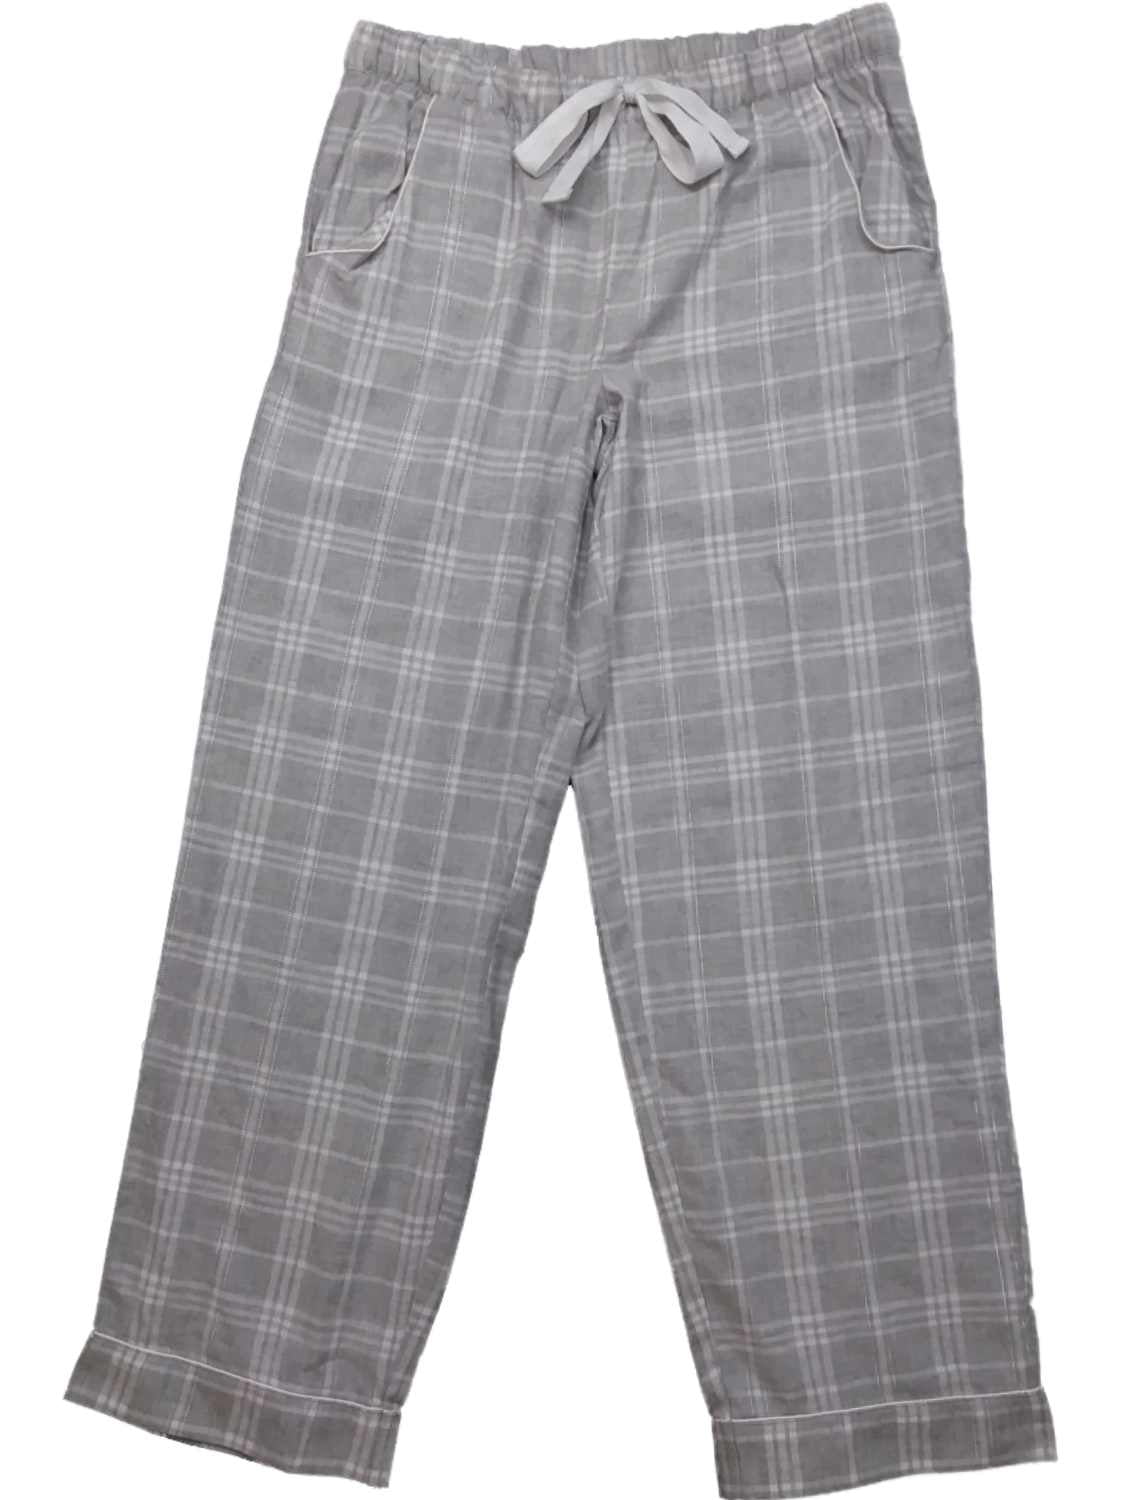 Simply Styled - Womens Gray White & Silver Plaid Flannel Sleep Pants ...